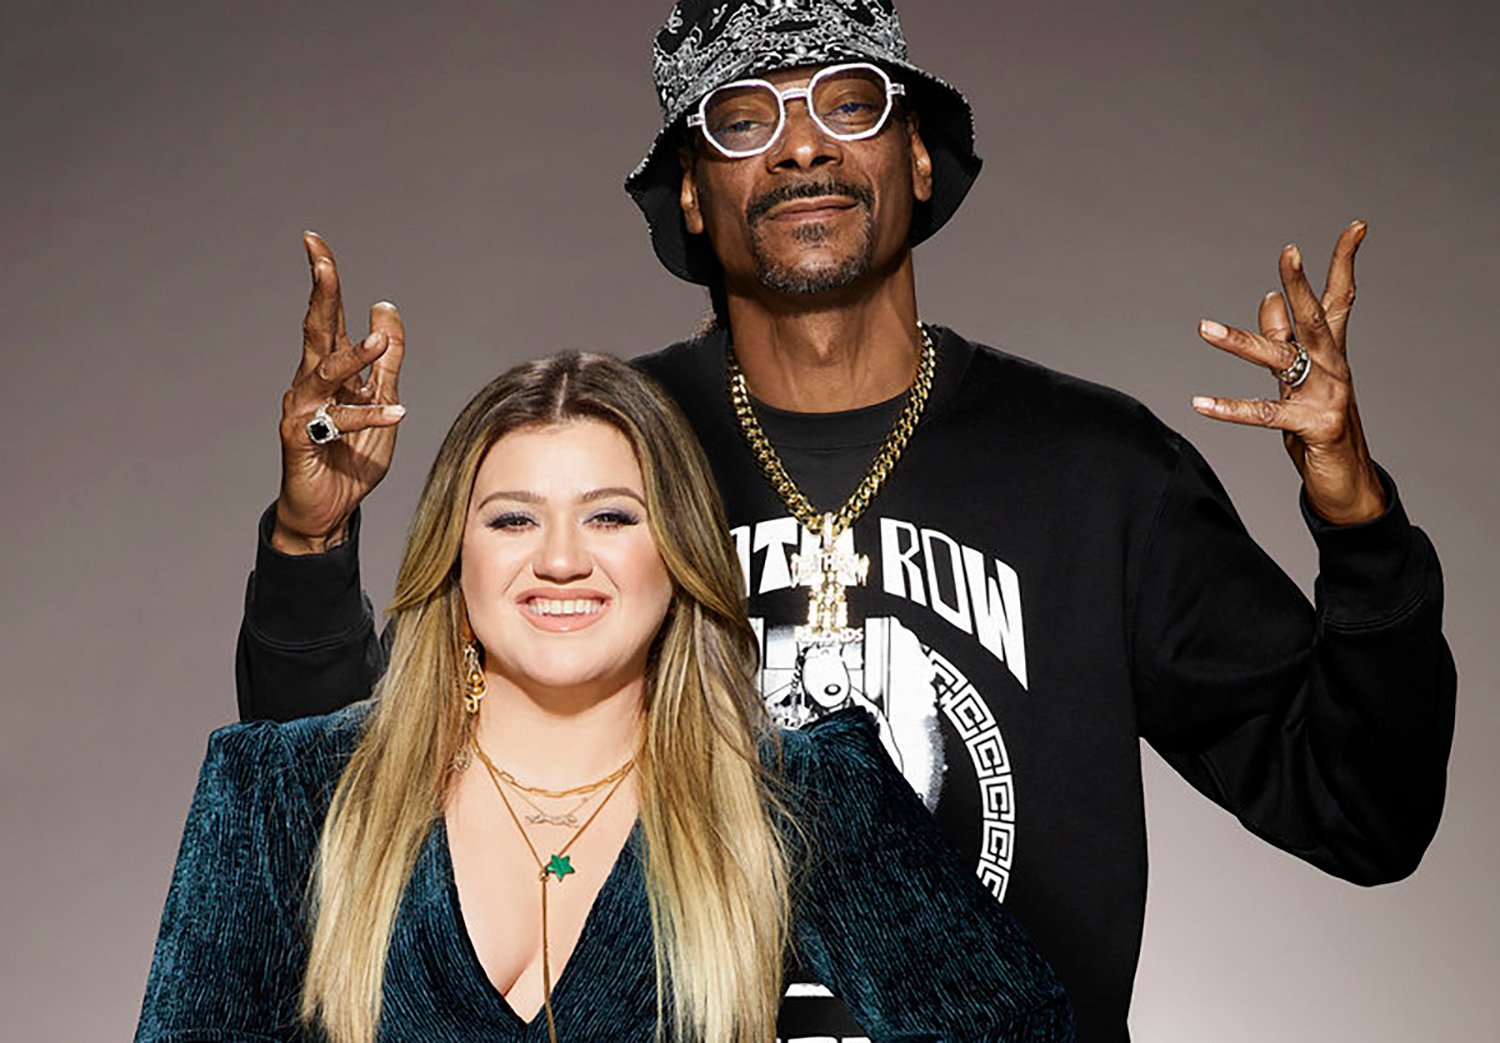 American Song Contest hosts Kelly Clarkson and Snoop Dogg ahead of the release date